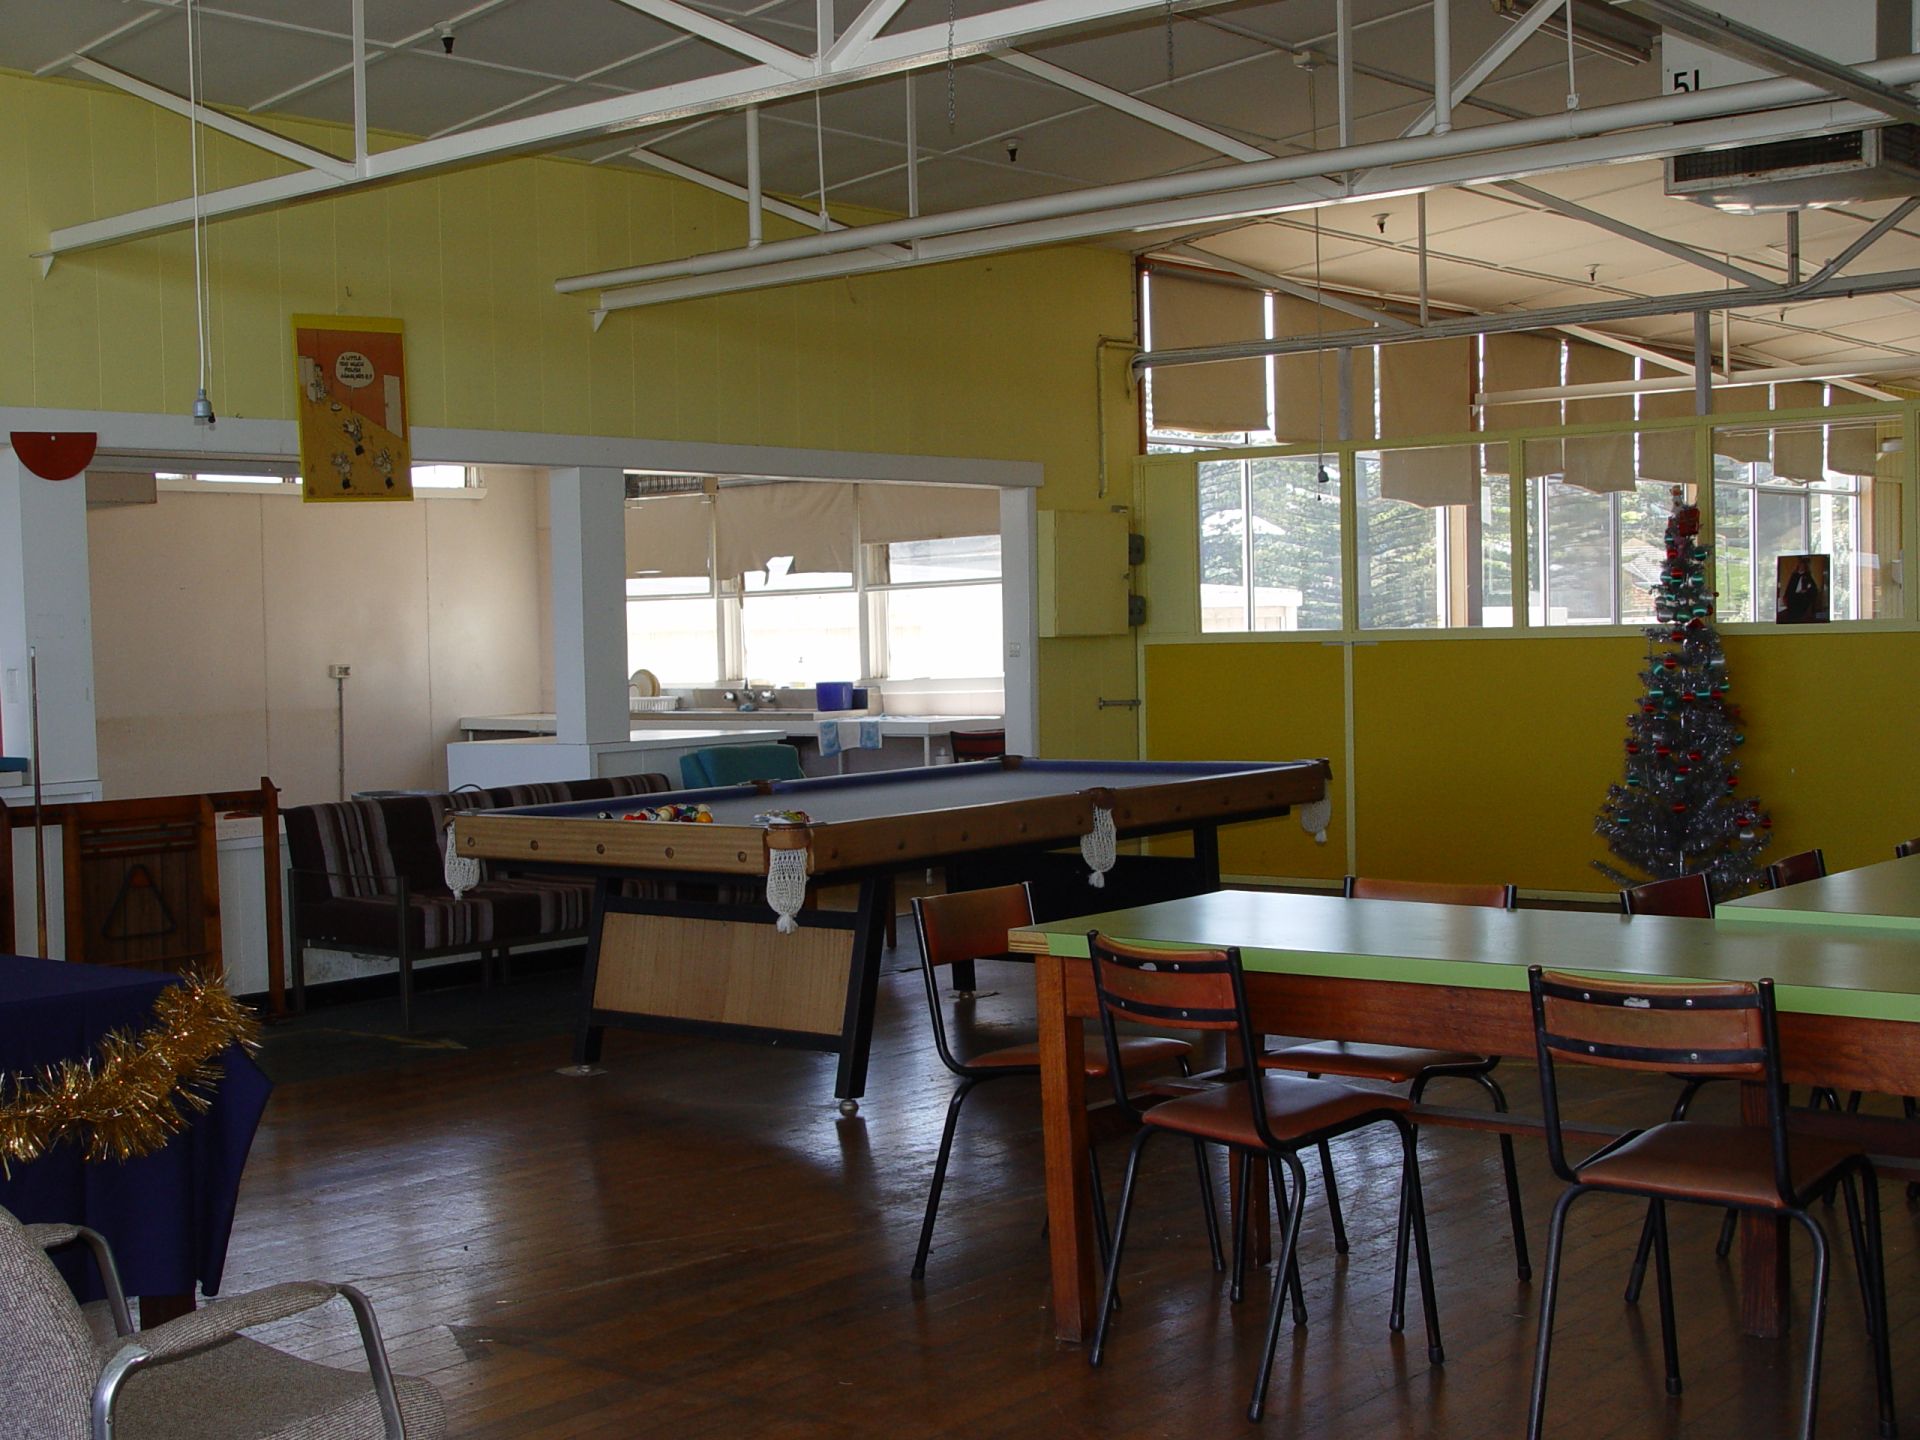 The Staff Canteen - December 2005 just before the Pleasant Hill factory closed. Photo: Tim Carlton  